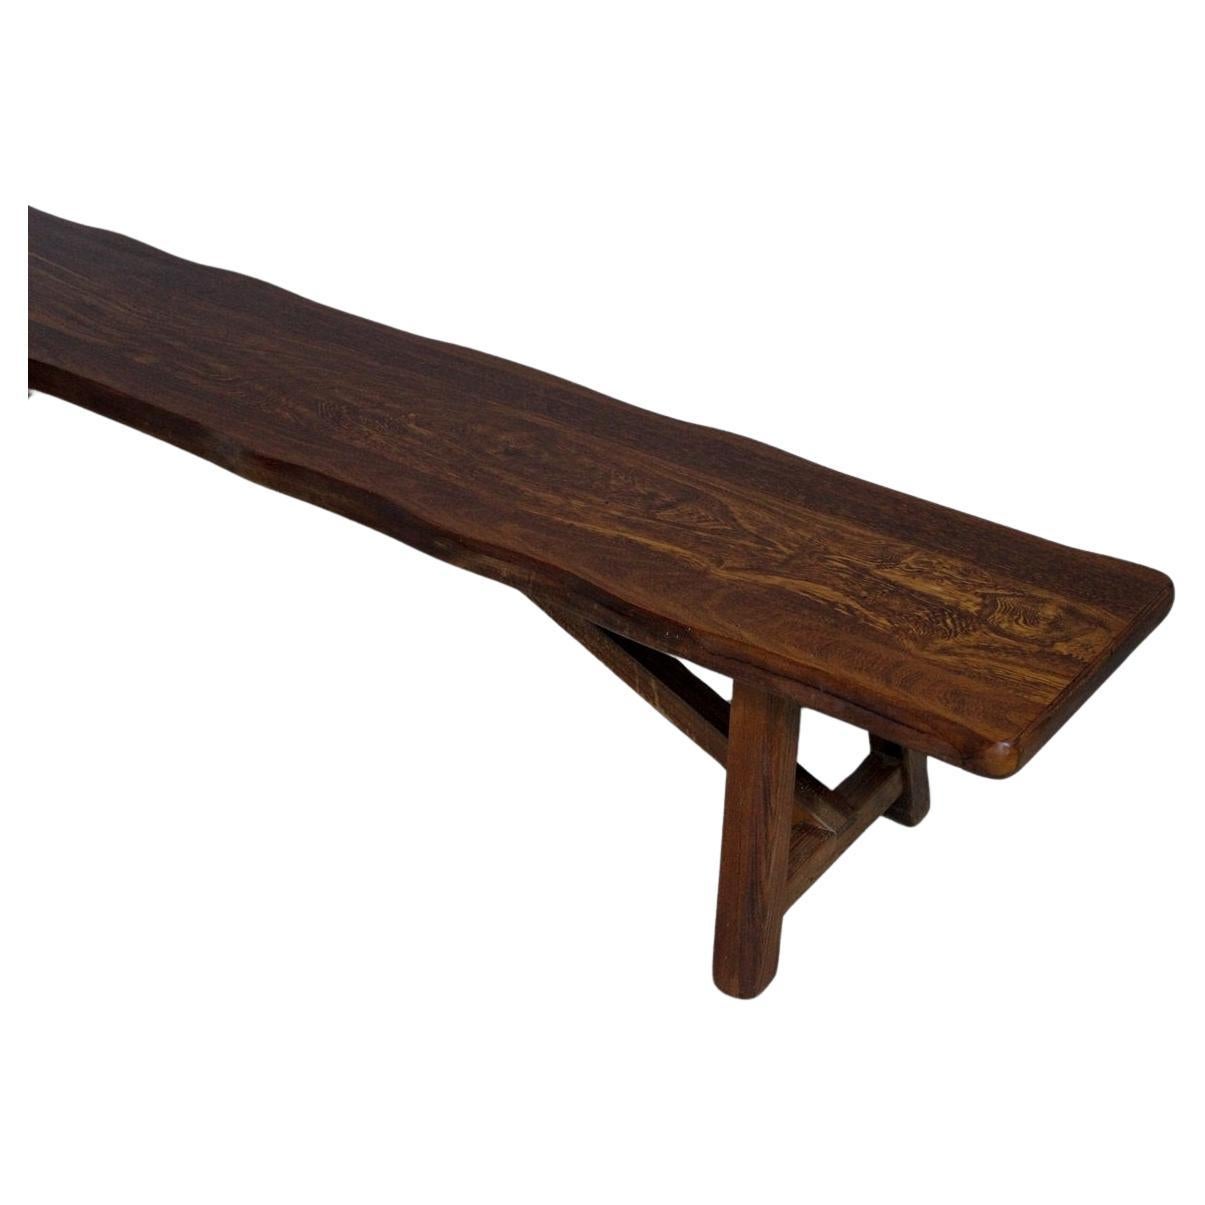 A unique and minimalist elm wood bench by Olavi Hanninen, circa 1950s. Amazing bench Brutalist design with thick wood seat, beautiful slightly wavy wood beam back and chunky angled legs. Original wood finish showing nice age and patina. 

The 1950s